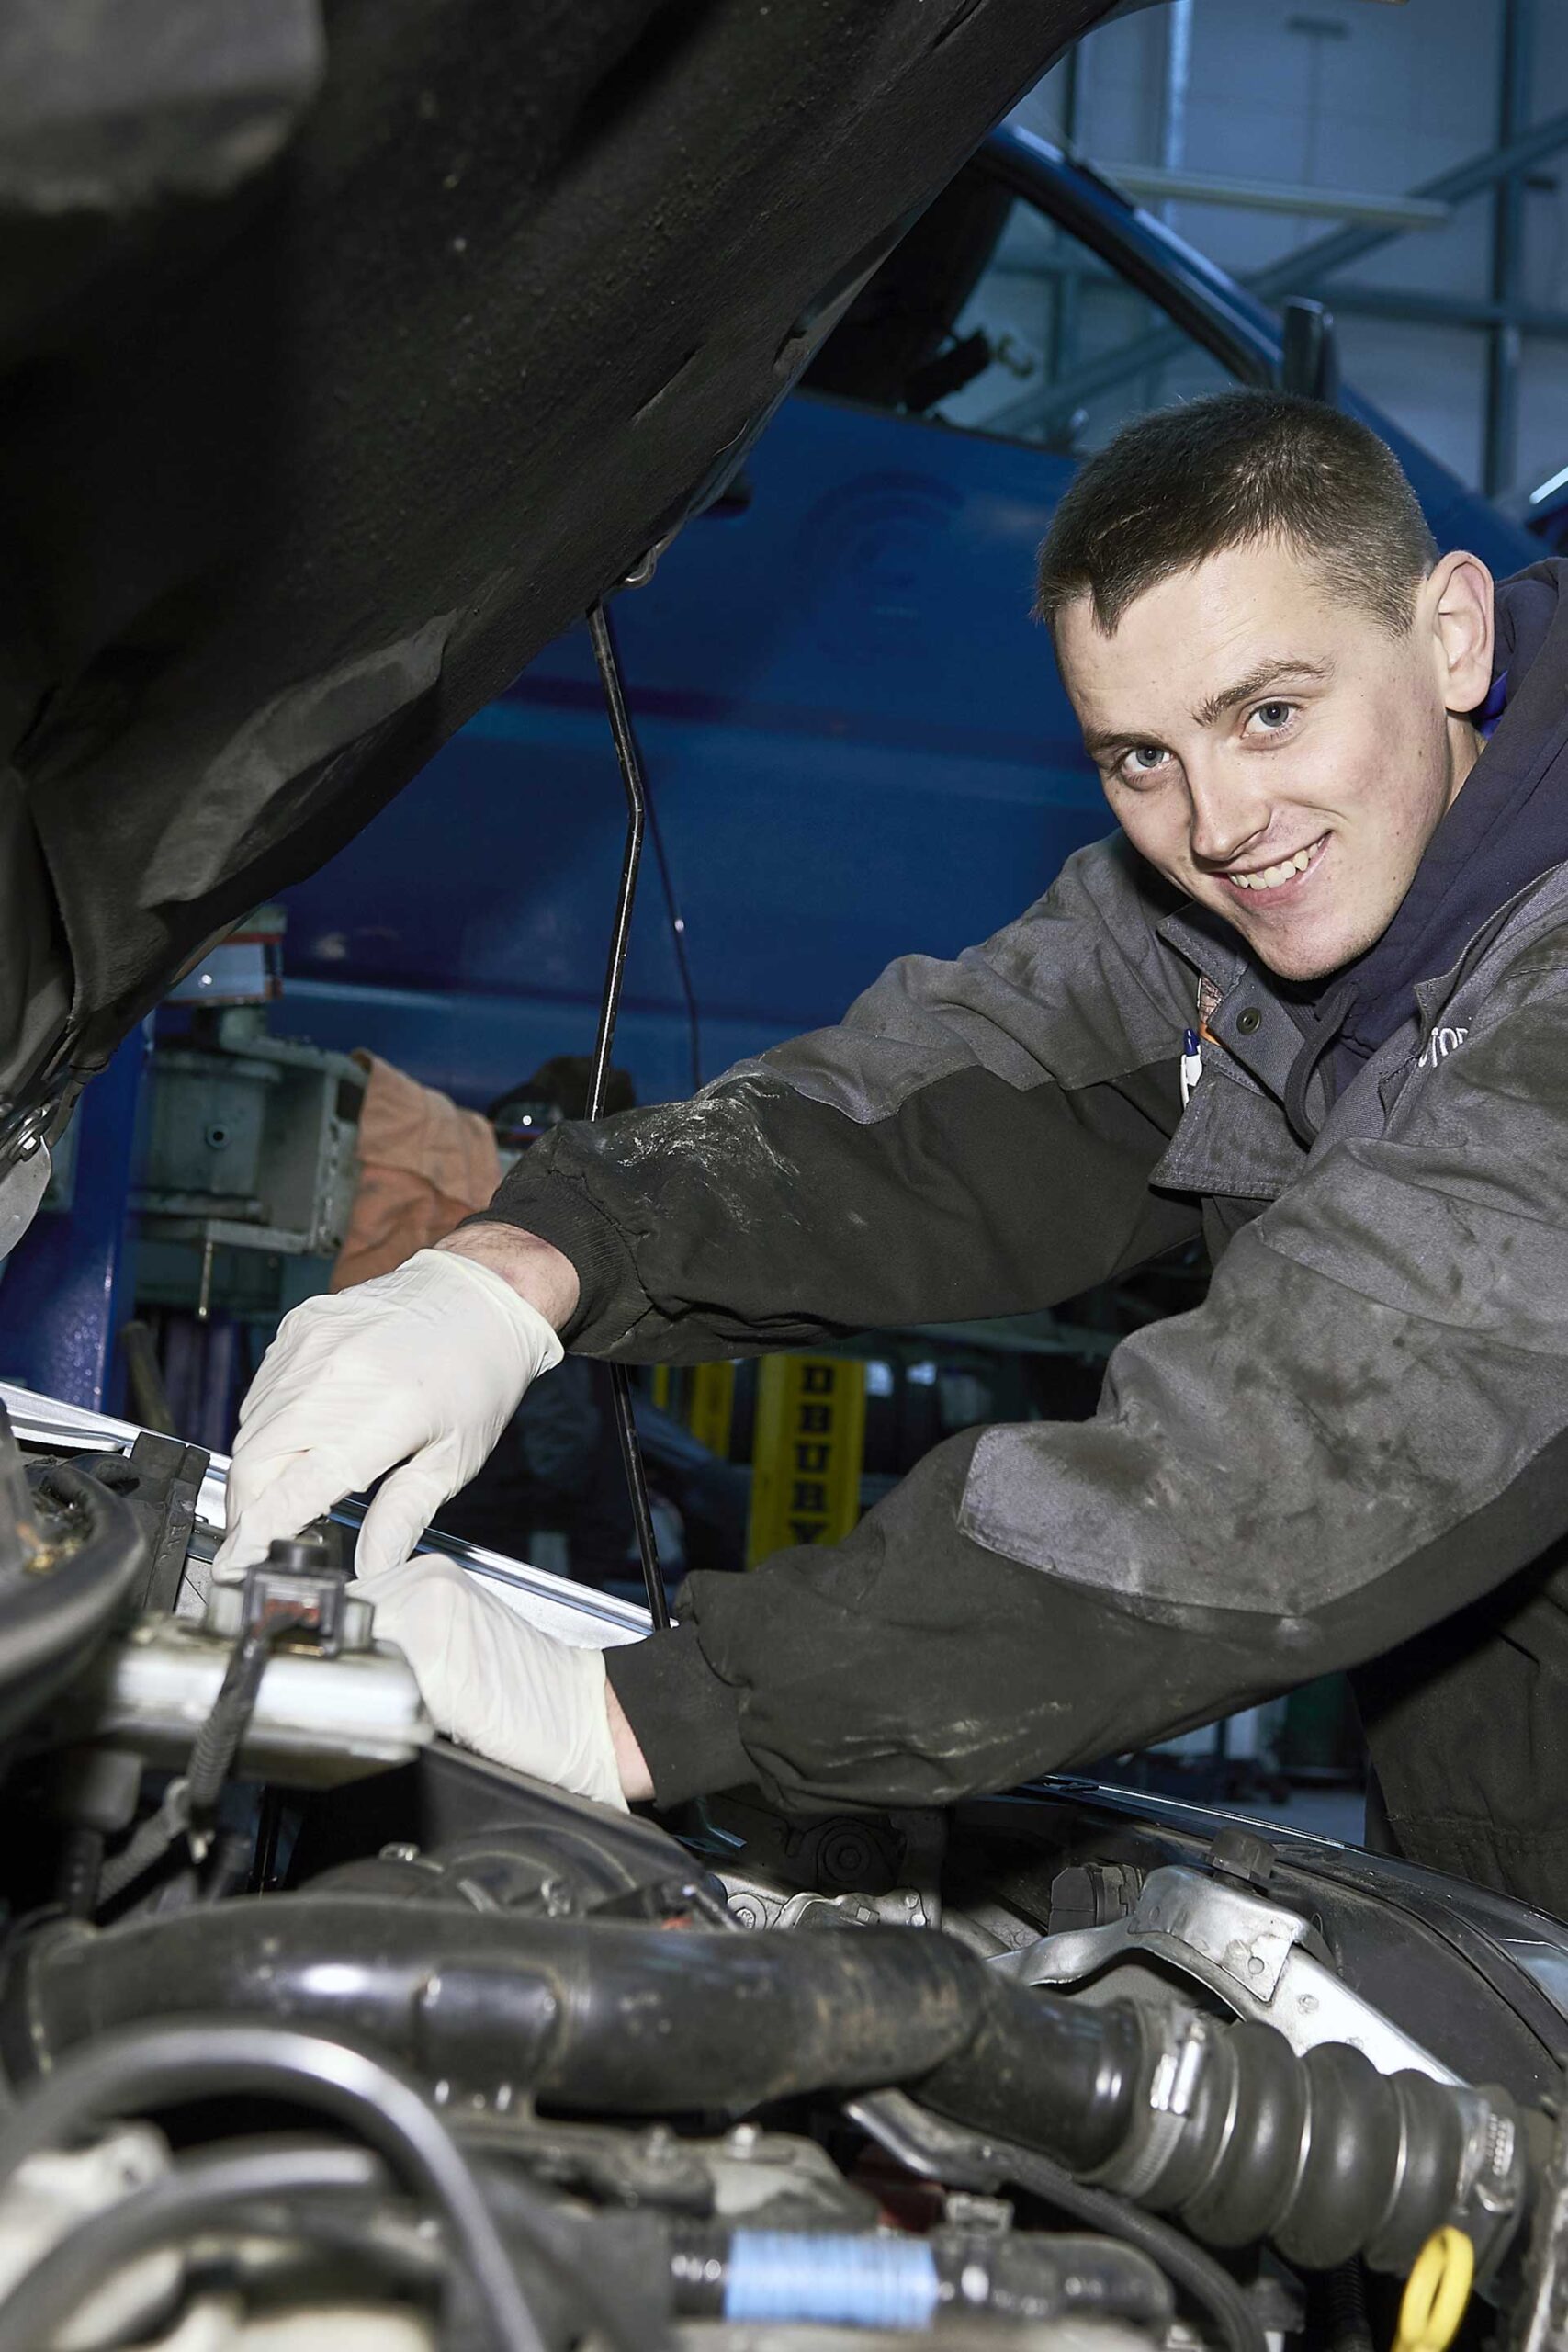 Are You in Need of a Fleet Maintenance Service for Commercial Vehicles?